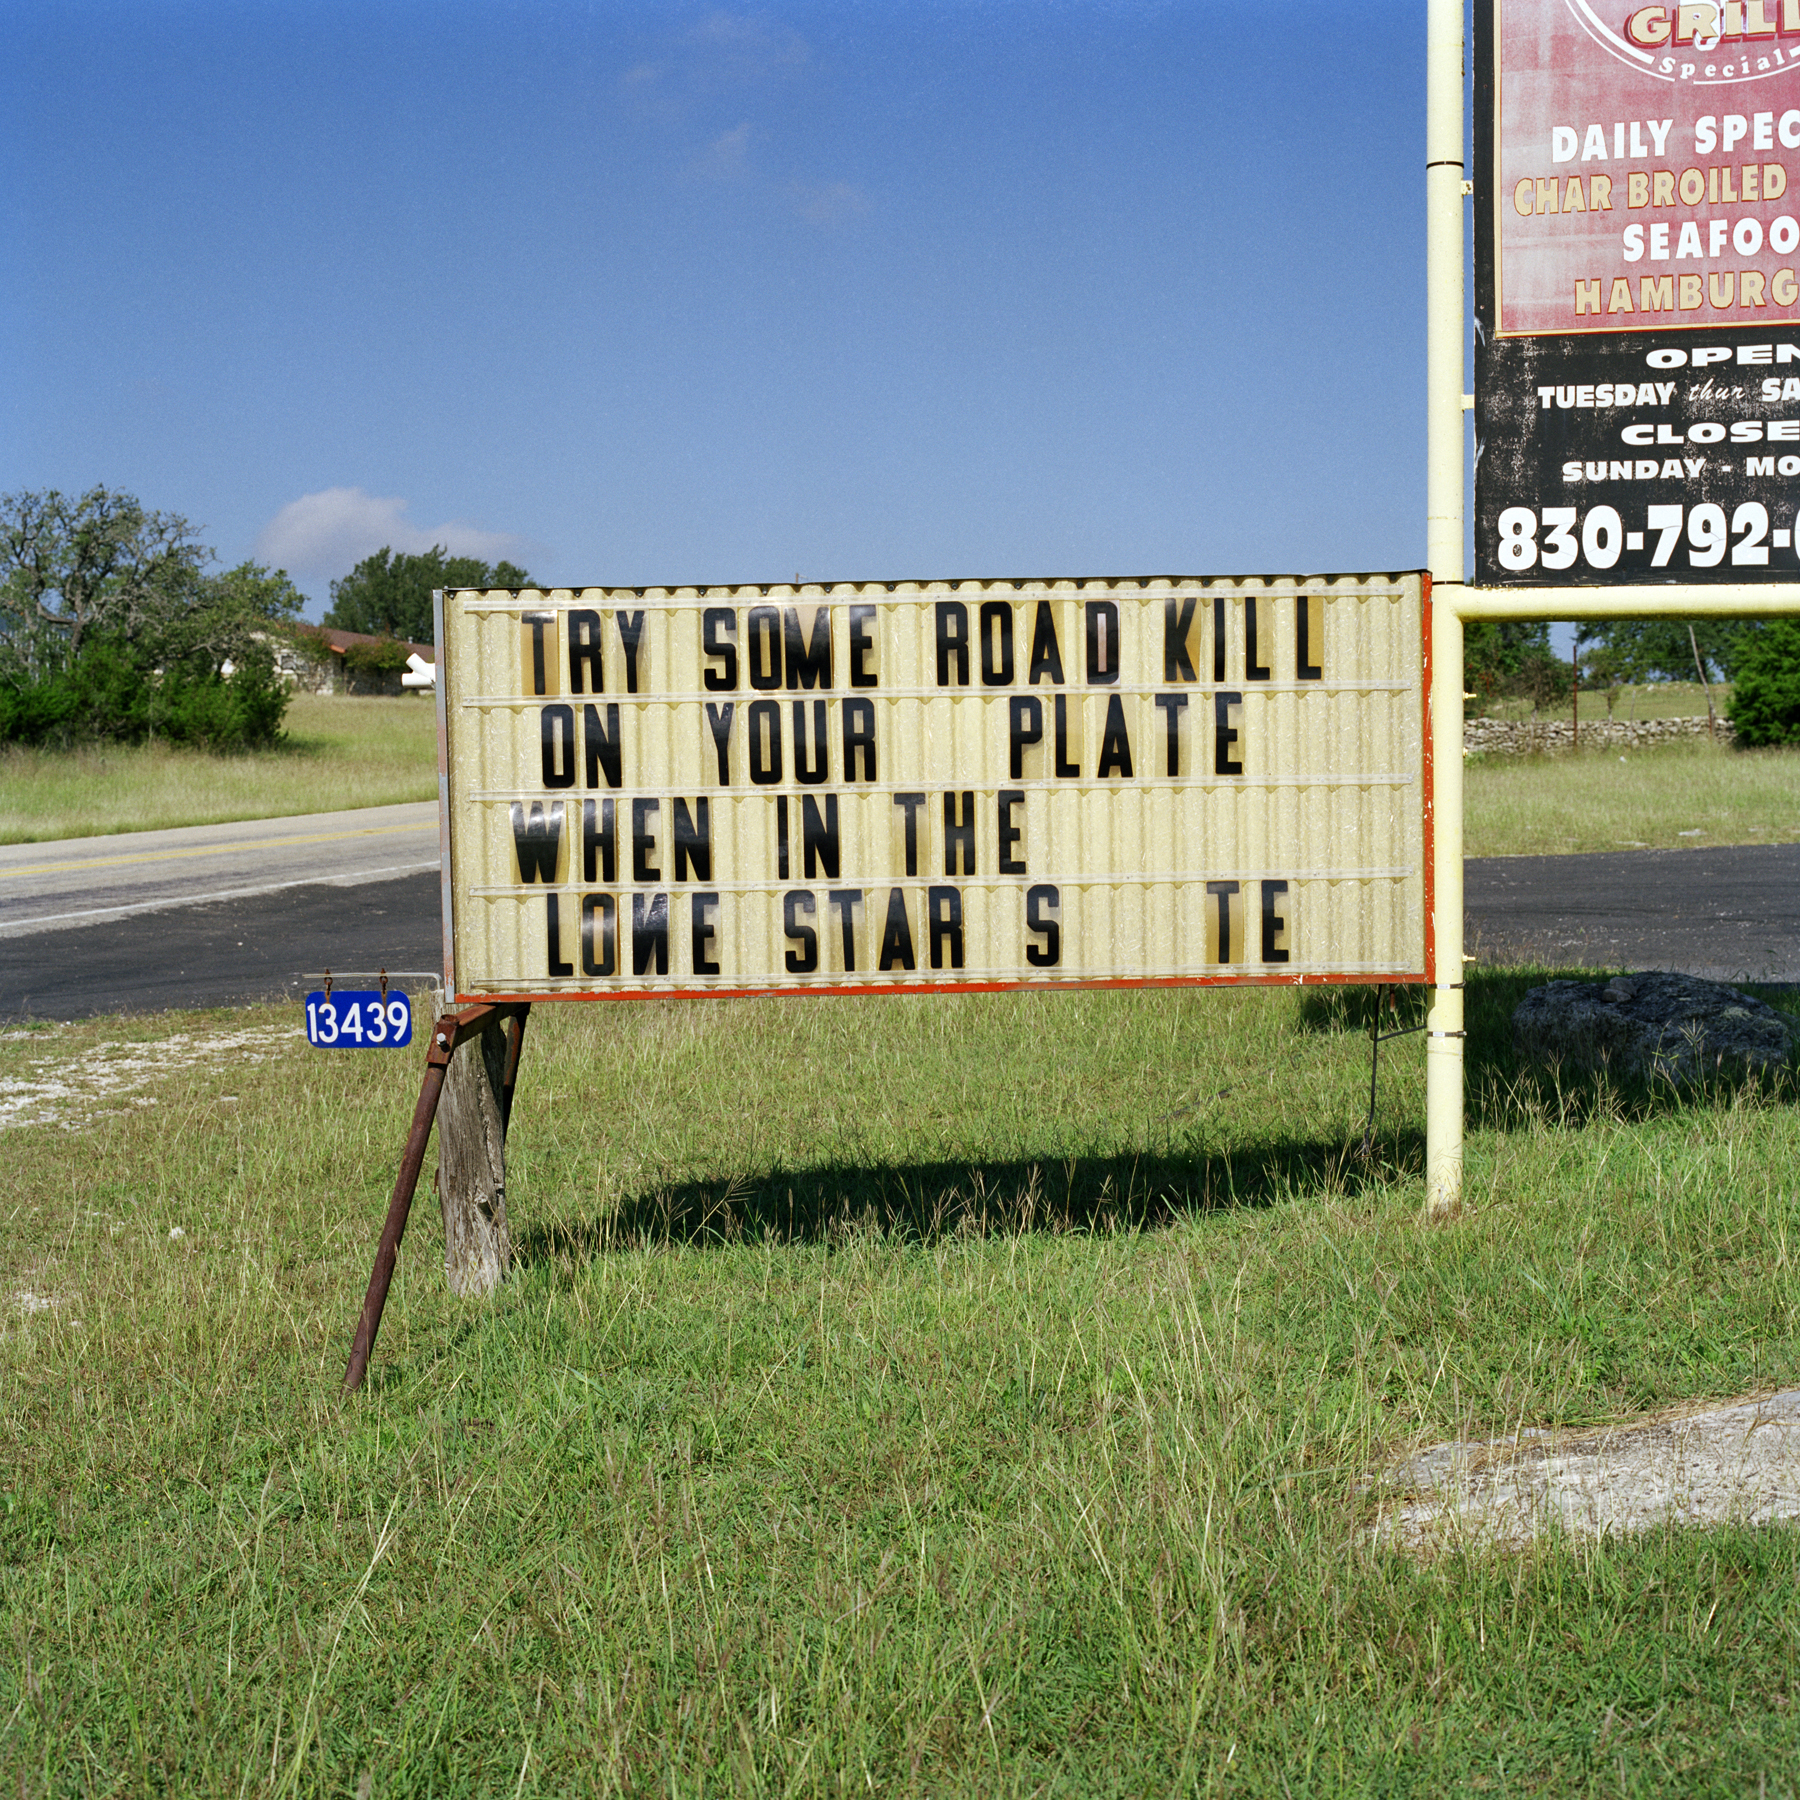 A “Try some roadkill” sign in Texas in the mid-2000s